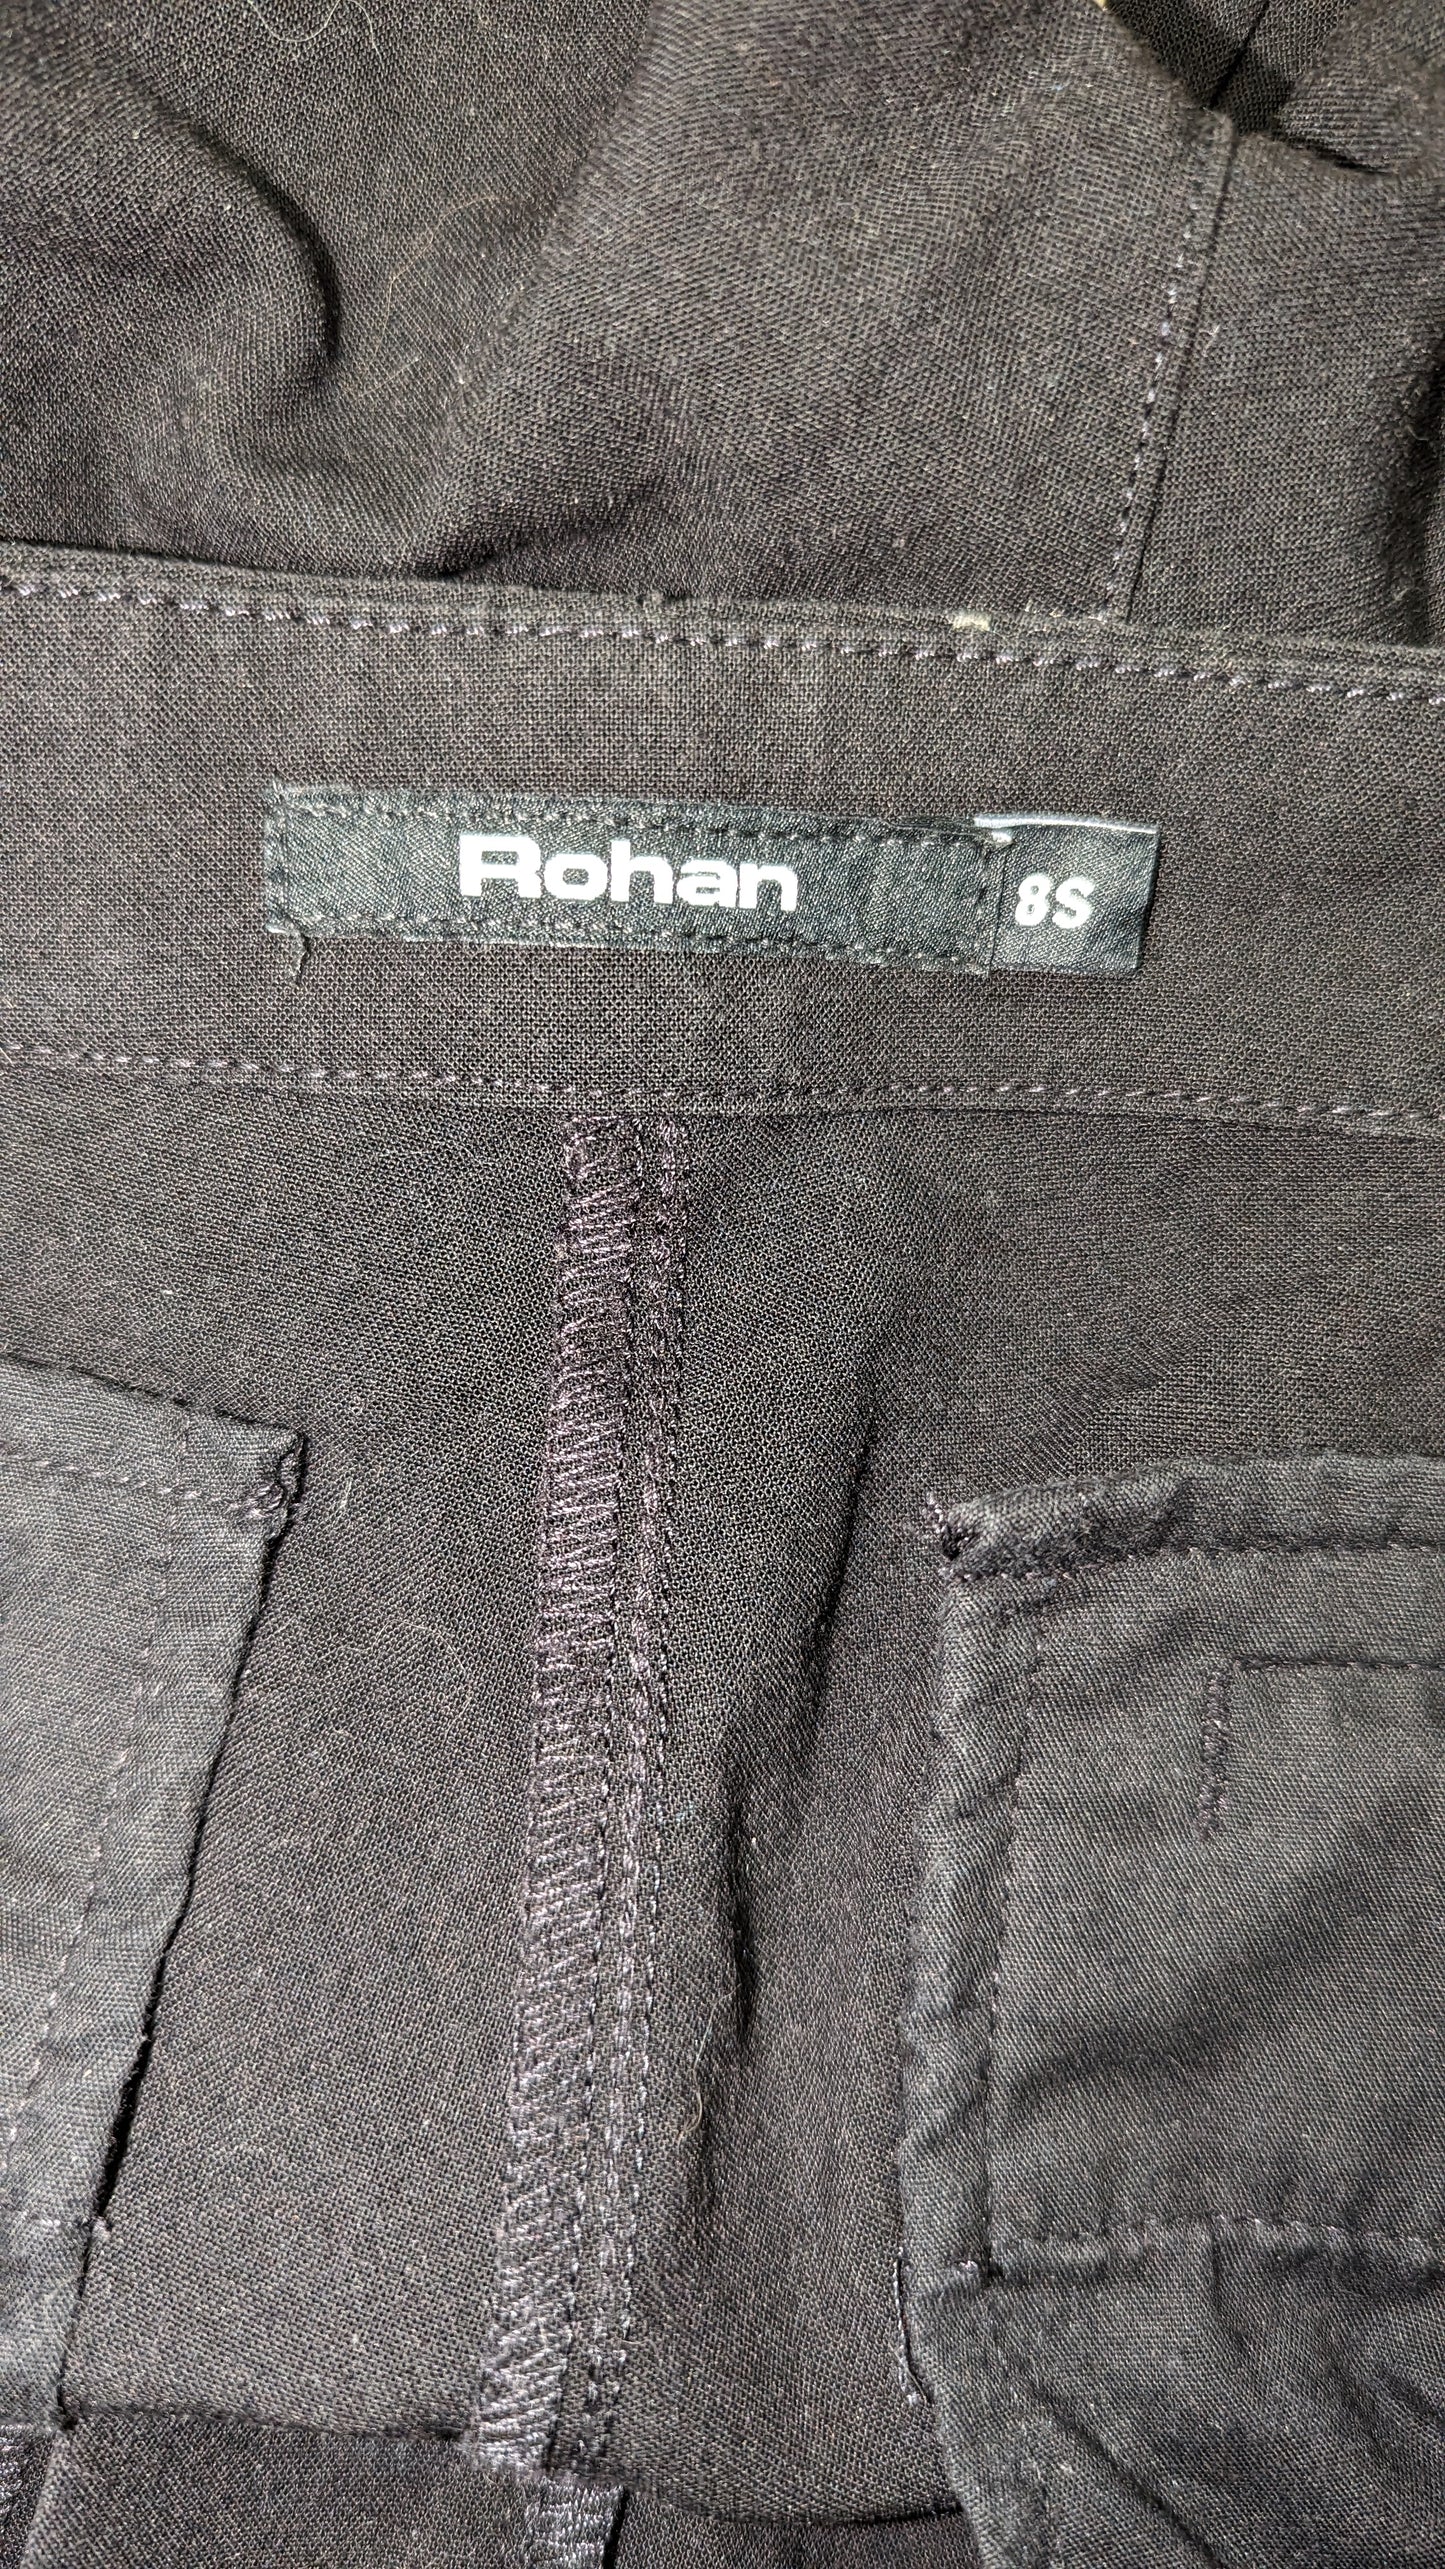 Ladies Rohan Trousers - Size 8S